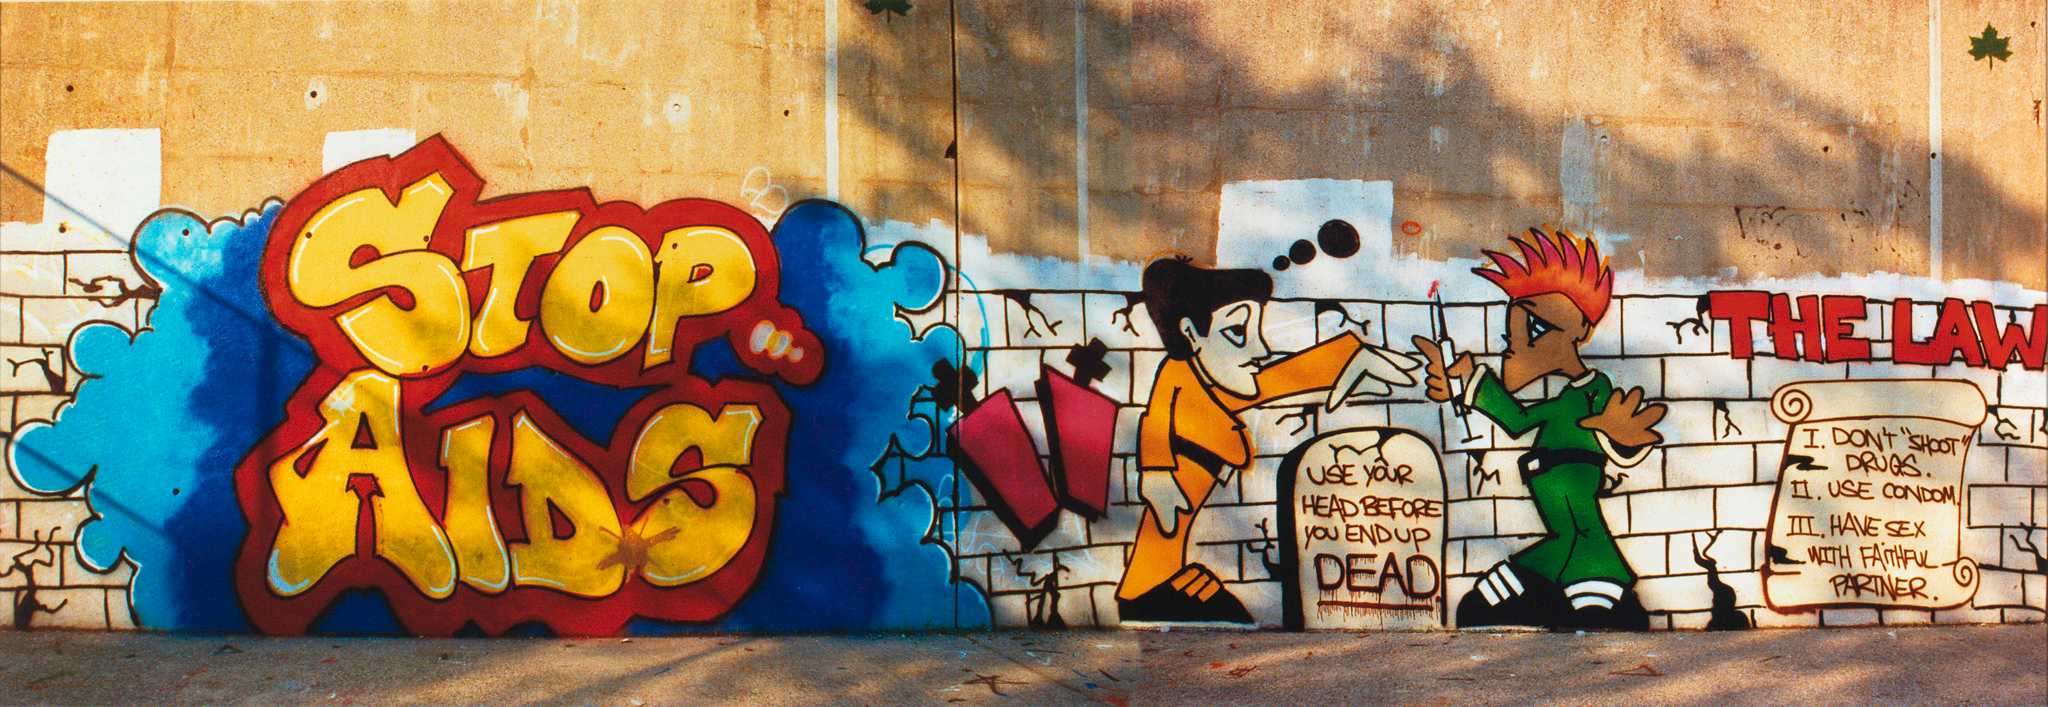 A color photograph of a portion of a Stop Aids graffiti mural in New York City. The mural is painted on a light tan wall. The bottom half of the image features a depiction of a white brick wall with cracks running through many of the bricks, running the full length of the image. A light and dark blue cloud features prominently on the left side of the image with the words [STOP / AIDS] spray painted in yellow letters outlined in red. The middle of the image features an illustration two men standing in profile, facing each other, on either side of a tombstone. The front of the tombstone has the text [USE YOUR / HEAD BEFORE / YOU END UP / DEAD.] written in black text. The word [DEAD] is underlined and the letters have drip lines giving it a bloody text effect. The man on the left is featured wearing a yellow shirt, yellow pants, and black shoes with yellow laces. He has three black thought bubbles above, and to the right of his head. He is holding his proper left hand splayed out, reaching for a syringe with a bloody hypodermic needle in the proper right hand of the man depicted on the right of the tombstone. The man on the right is depicted with red spikey hair, a green shirt, green pants and black shoes with white laces. On the far right of the image is the text [THE LAW] written in red block letters, outlined in black, above a depiction of scrolled paper with the text [I. DON’T “SHOOT” / DRUGS. / II. USE CONDOM. / III. HAVE SEX WITH FAiTHFUL / PARTNER.] written in black text. There are no inscriptions on the recto. On the verso the image is signed in blue ink by the photographer.